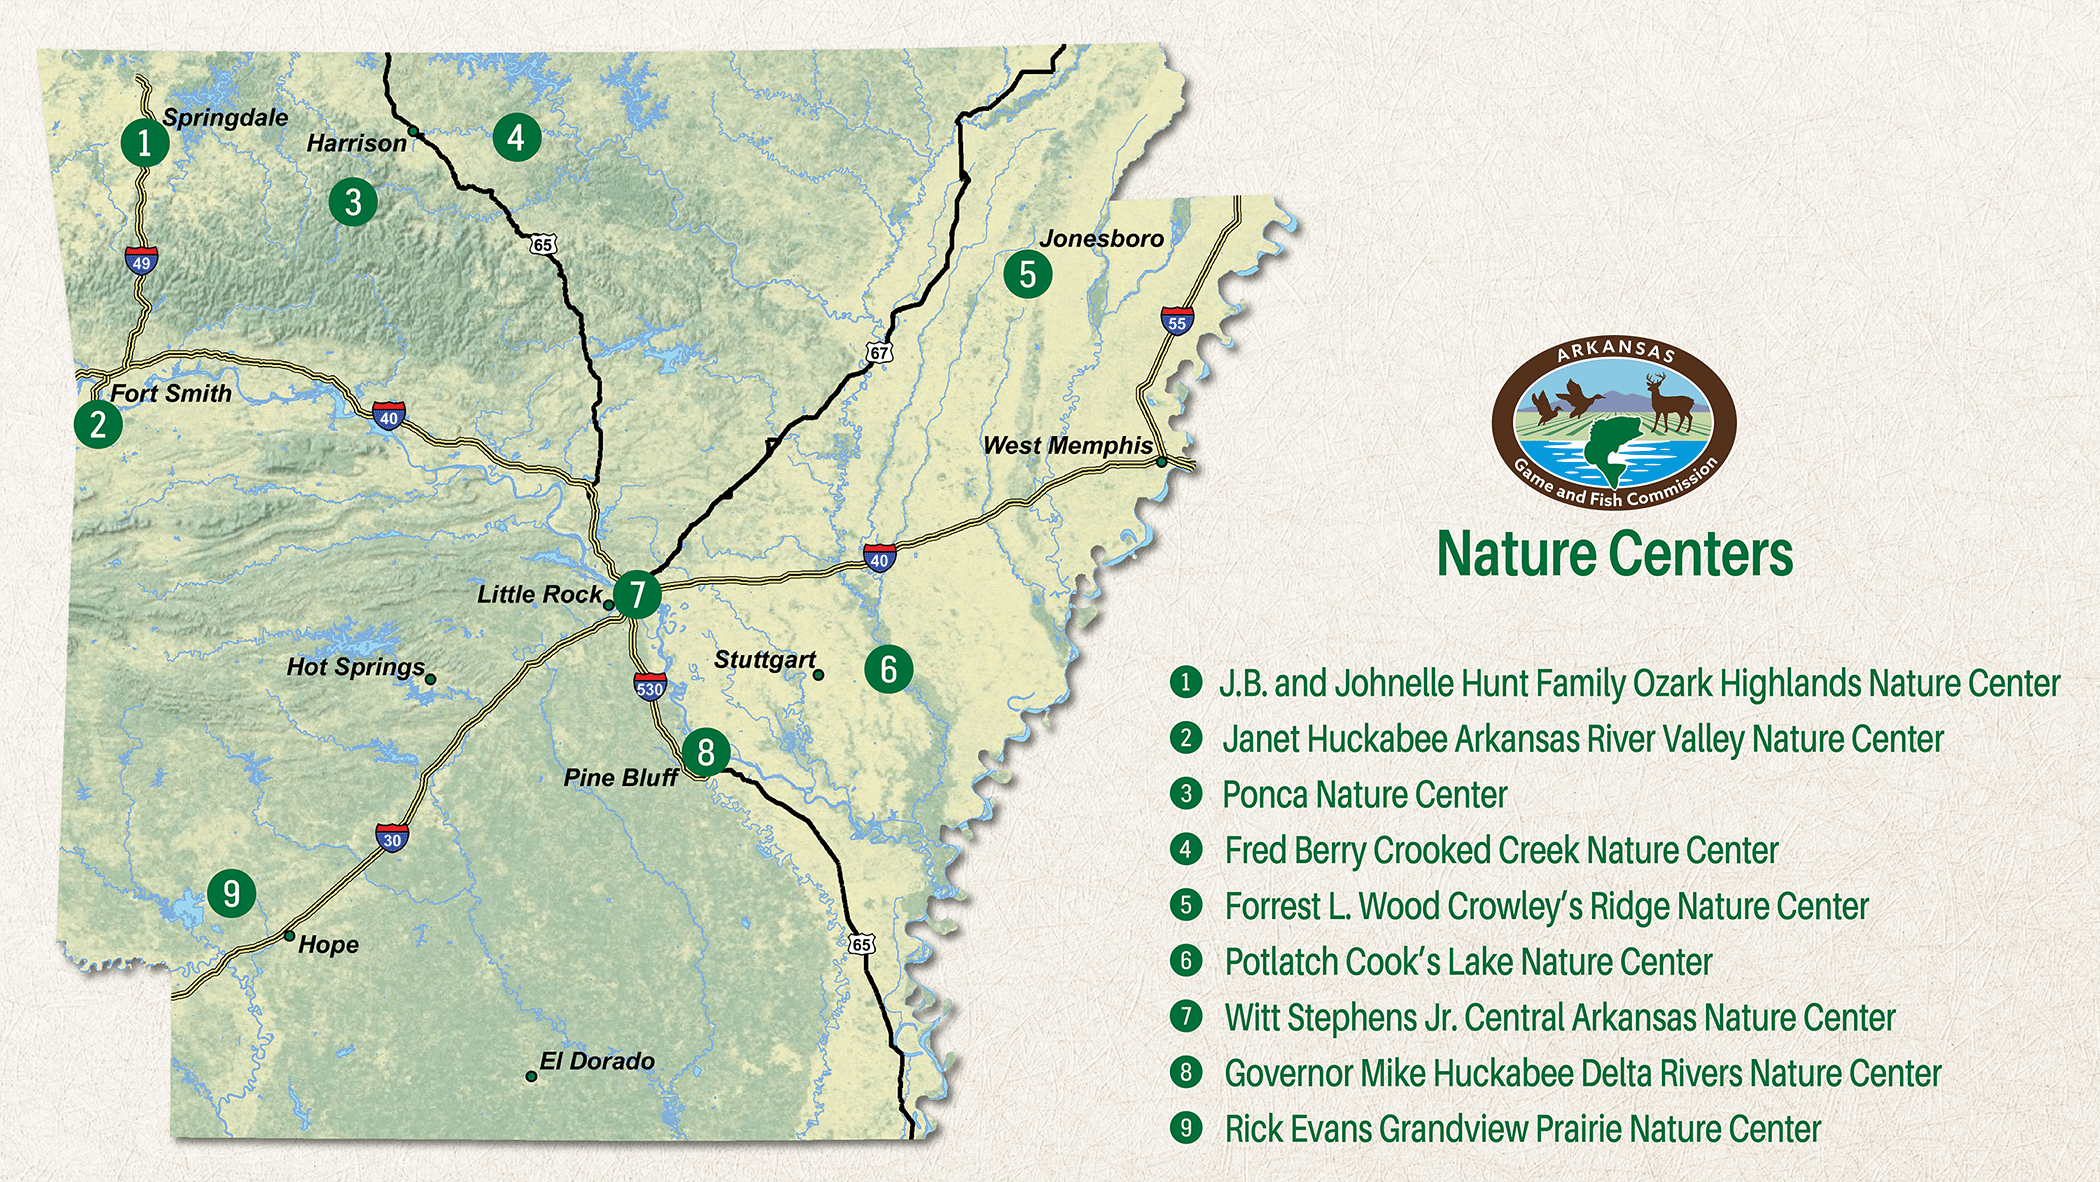 The AGFC operates nine nature centers around the state.